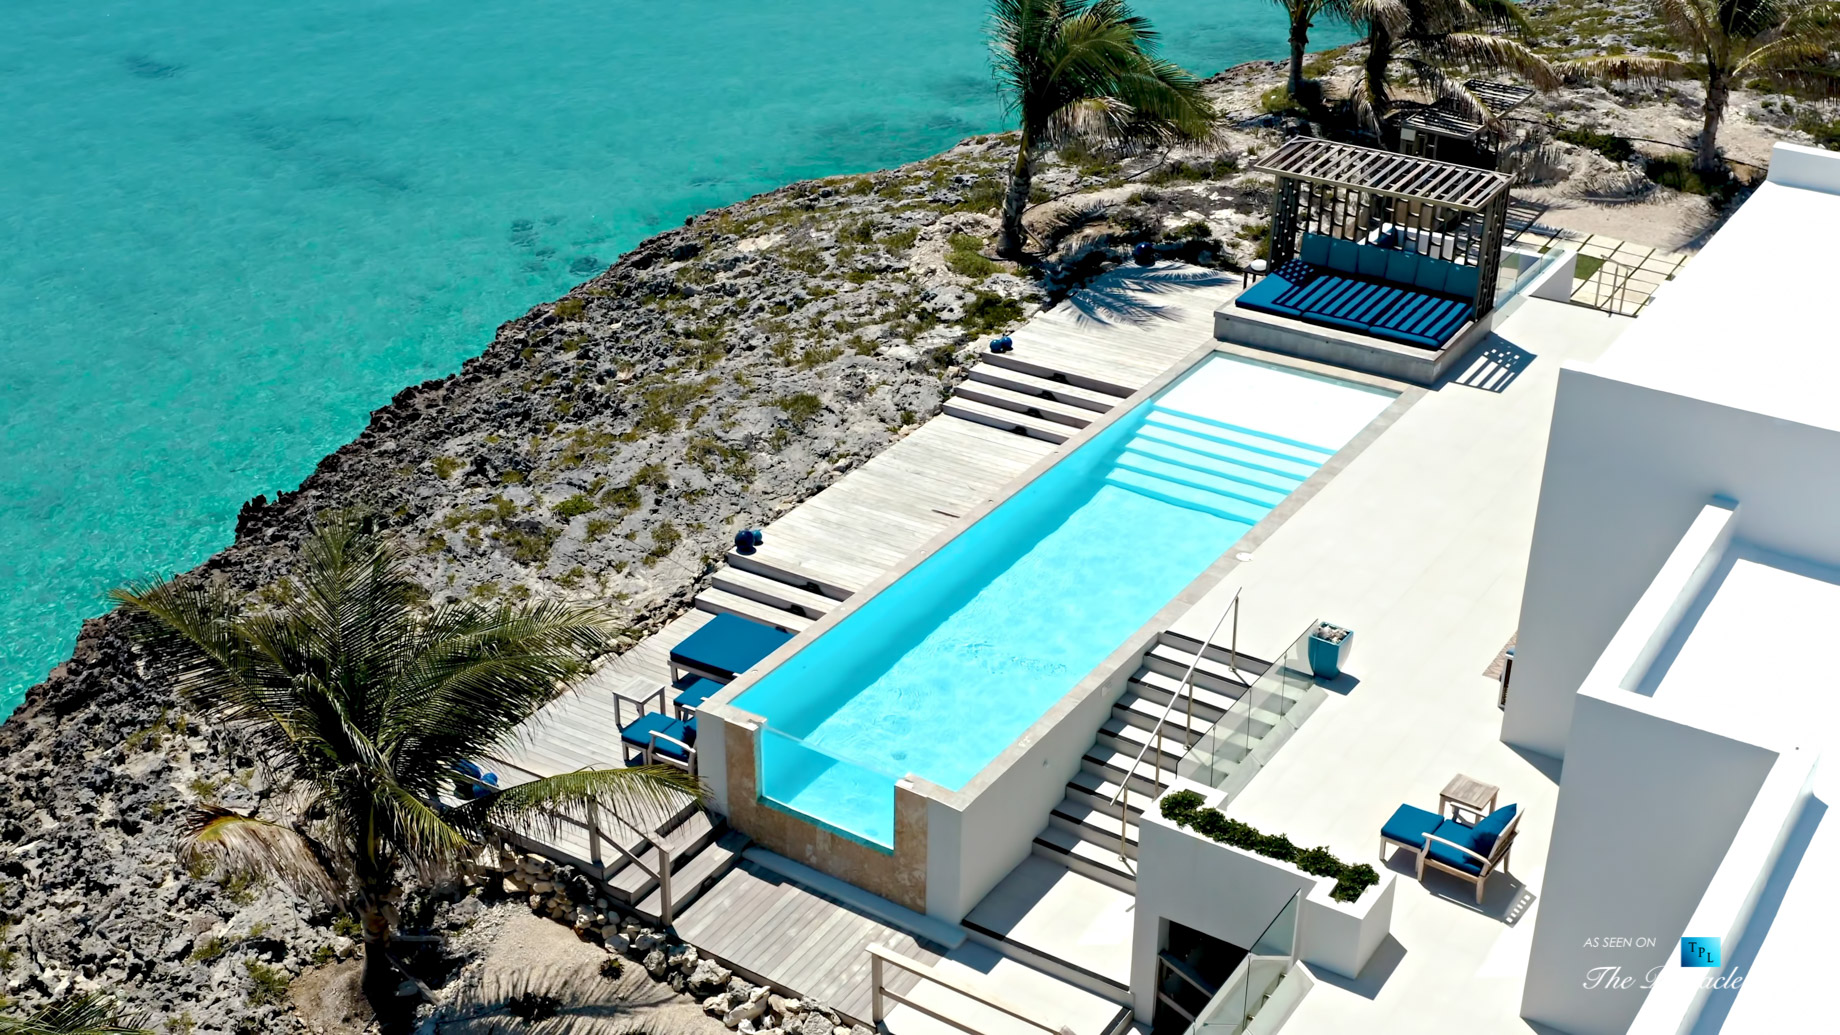 Tip of the Tail Villa - Providenciales, Turks and Caicos Islands - Caribbean House Infinity Pool Deck - Luxury Real Estate - South Shore Peninsula Home